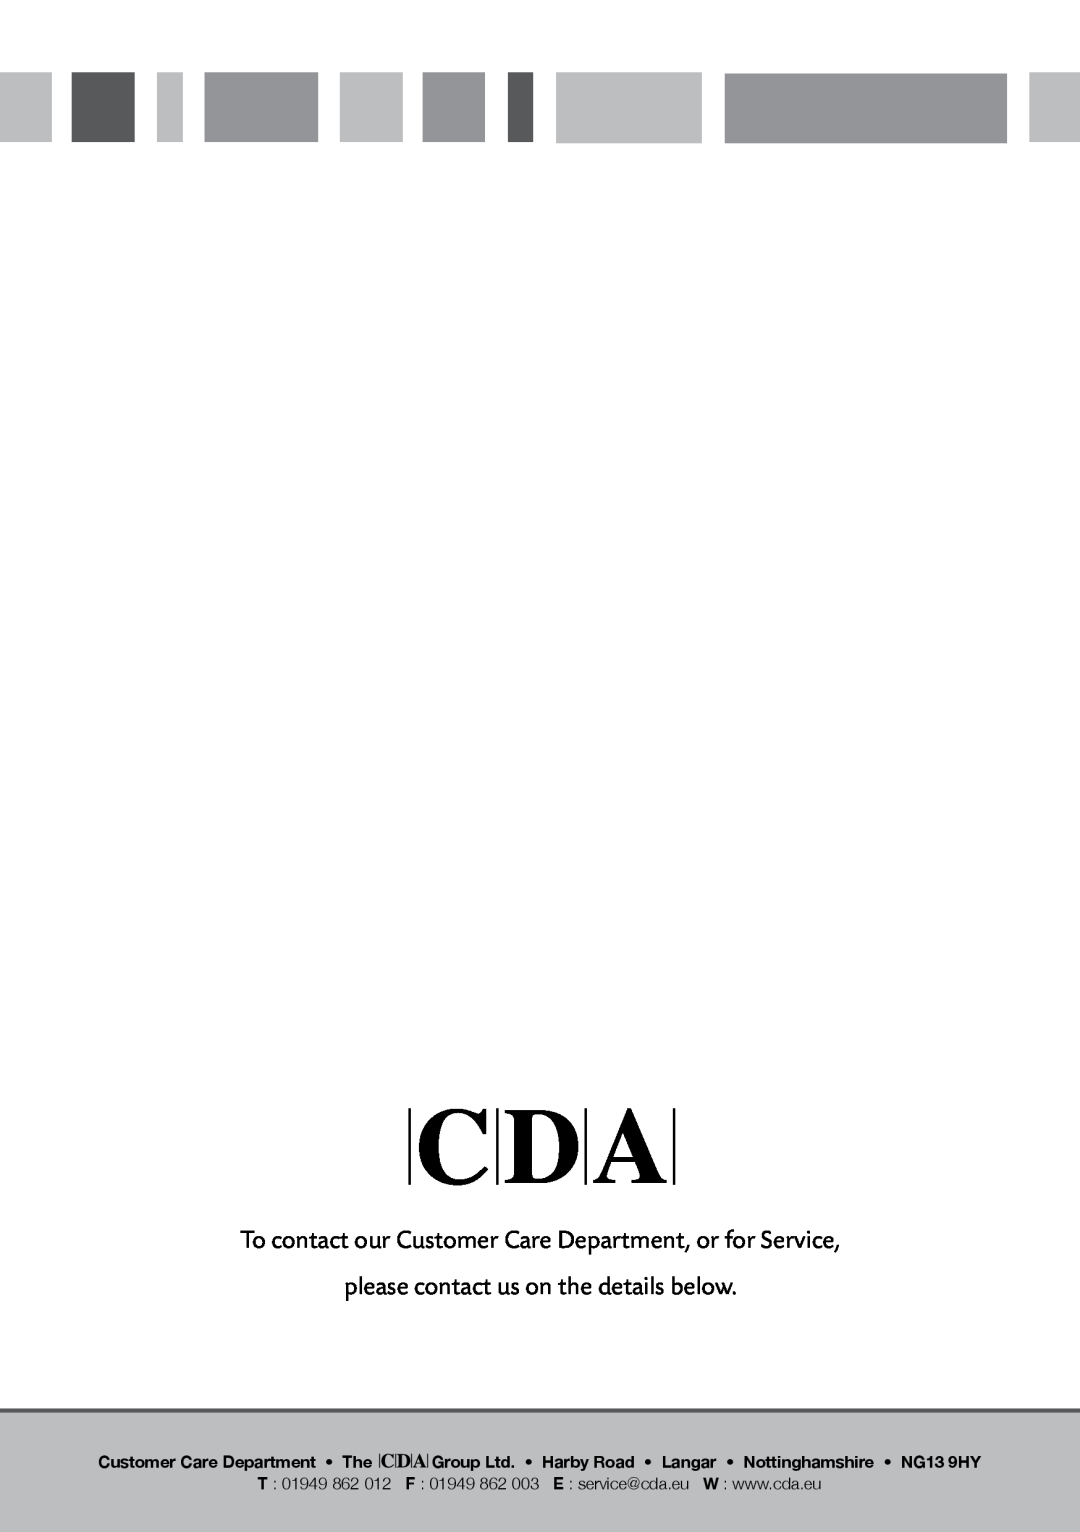 CDA 3L9 manual To contact our Customer Care Department, or for Service, please contact us on the details below, T 01949 